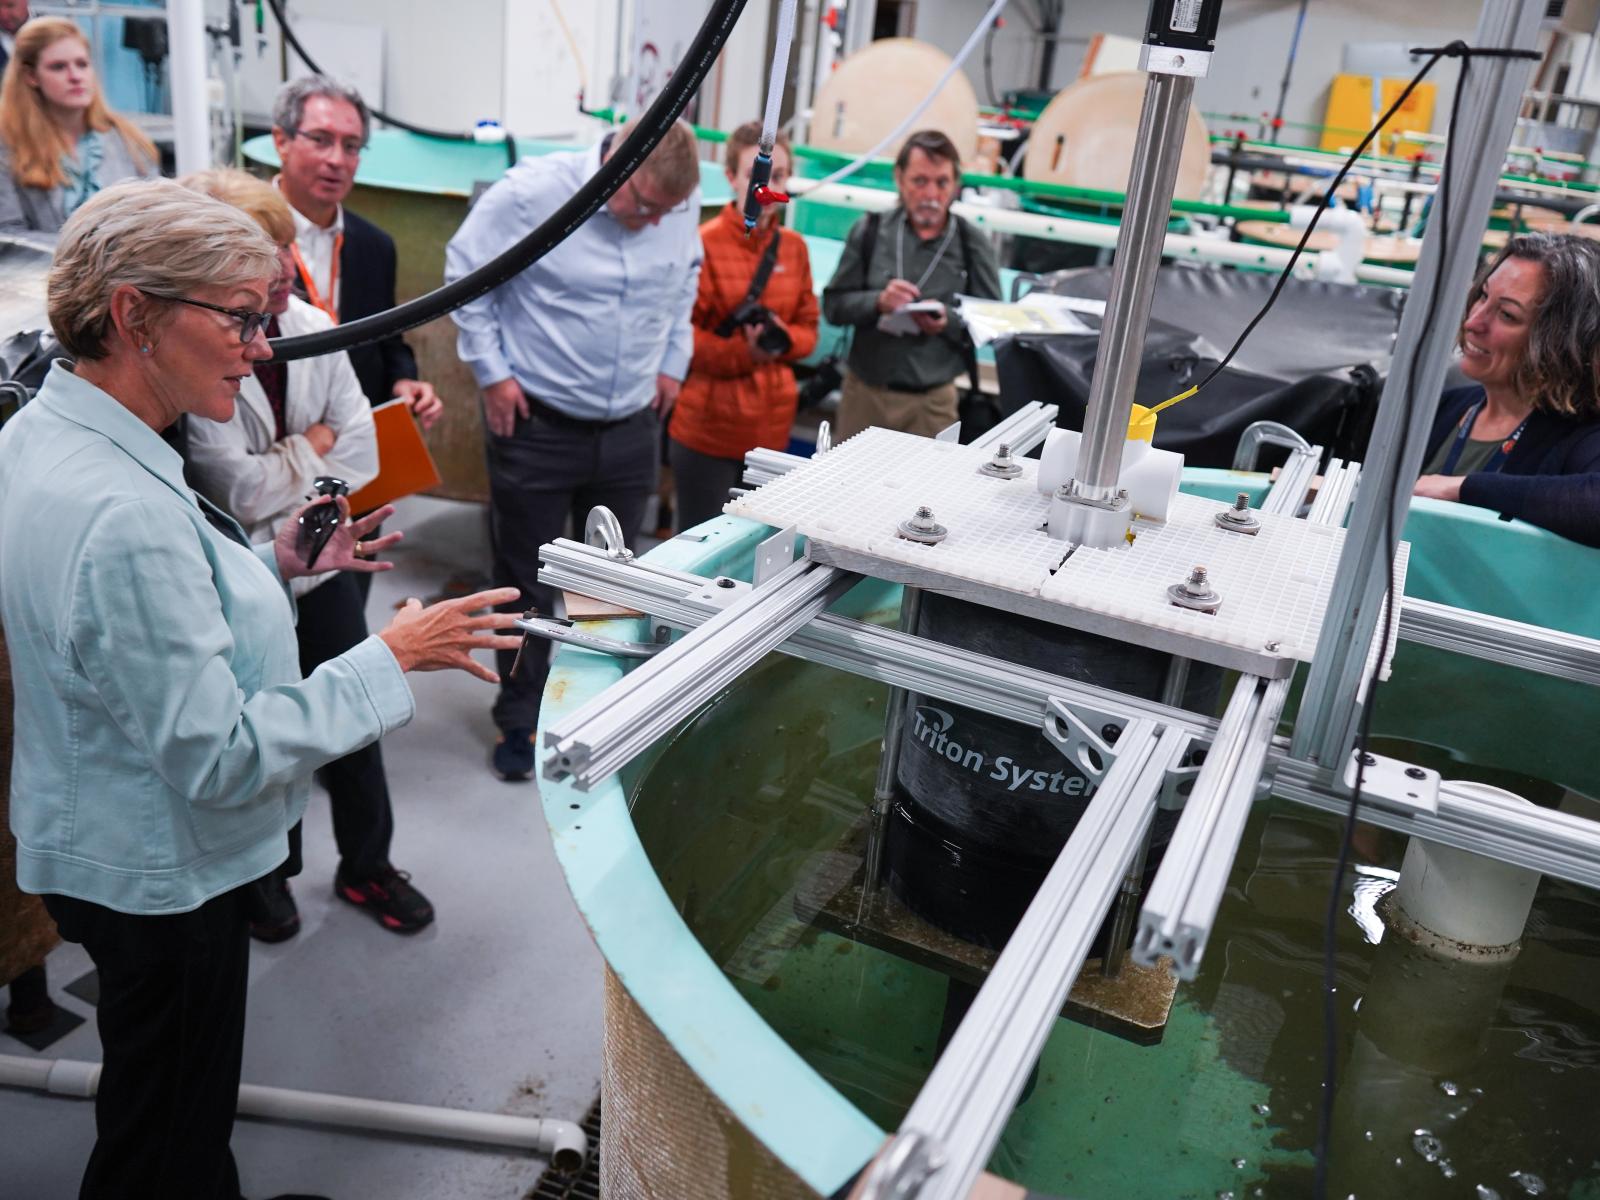 PNNL scientists explain ongoing marine research in laboratory tanks to Secretary Granholm.